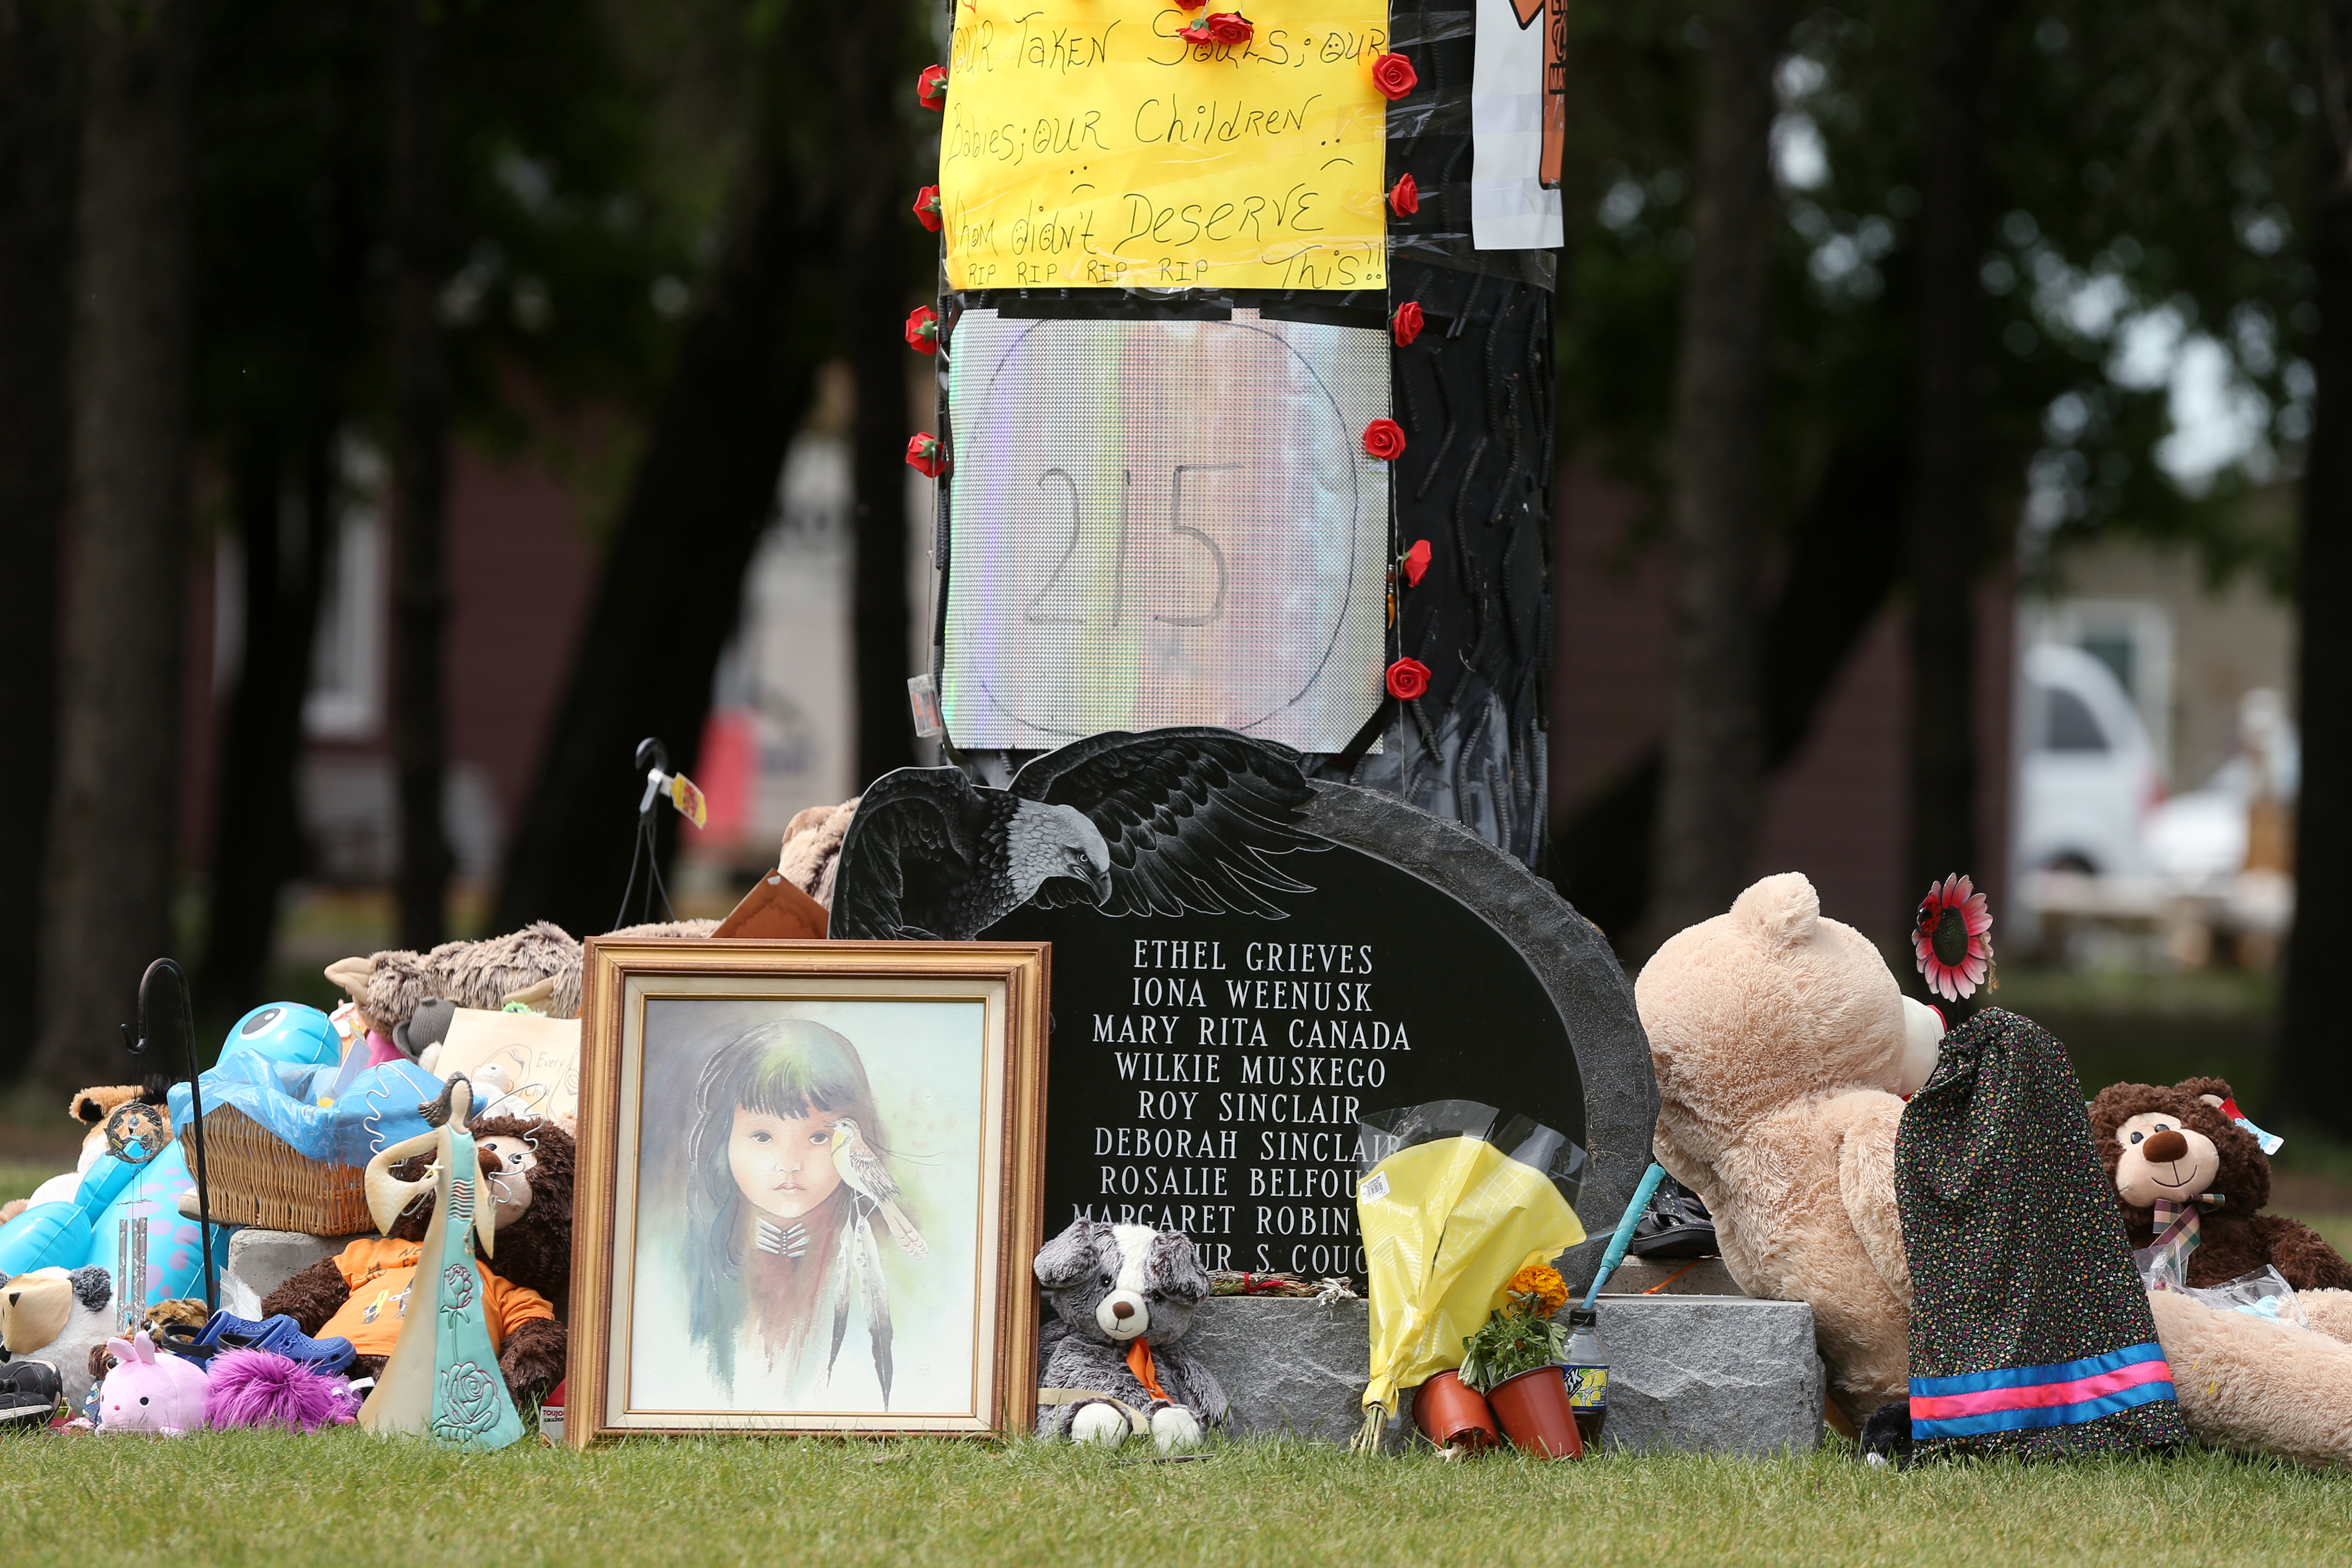 Children's shoes, toys, candy, tobacco and flowers are left on a memorial at the Portage La Prairie Indian Residential School, which closed in 1975, in Portage La Prairie, Manitoba, Canada June 8, 2021.  REUTERS/Shannon VanRaes